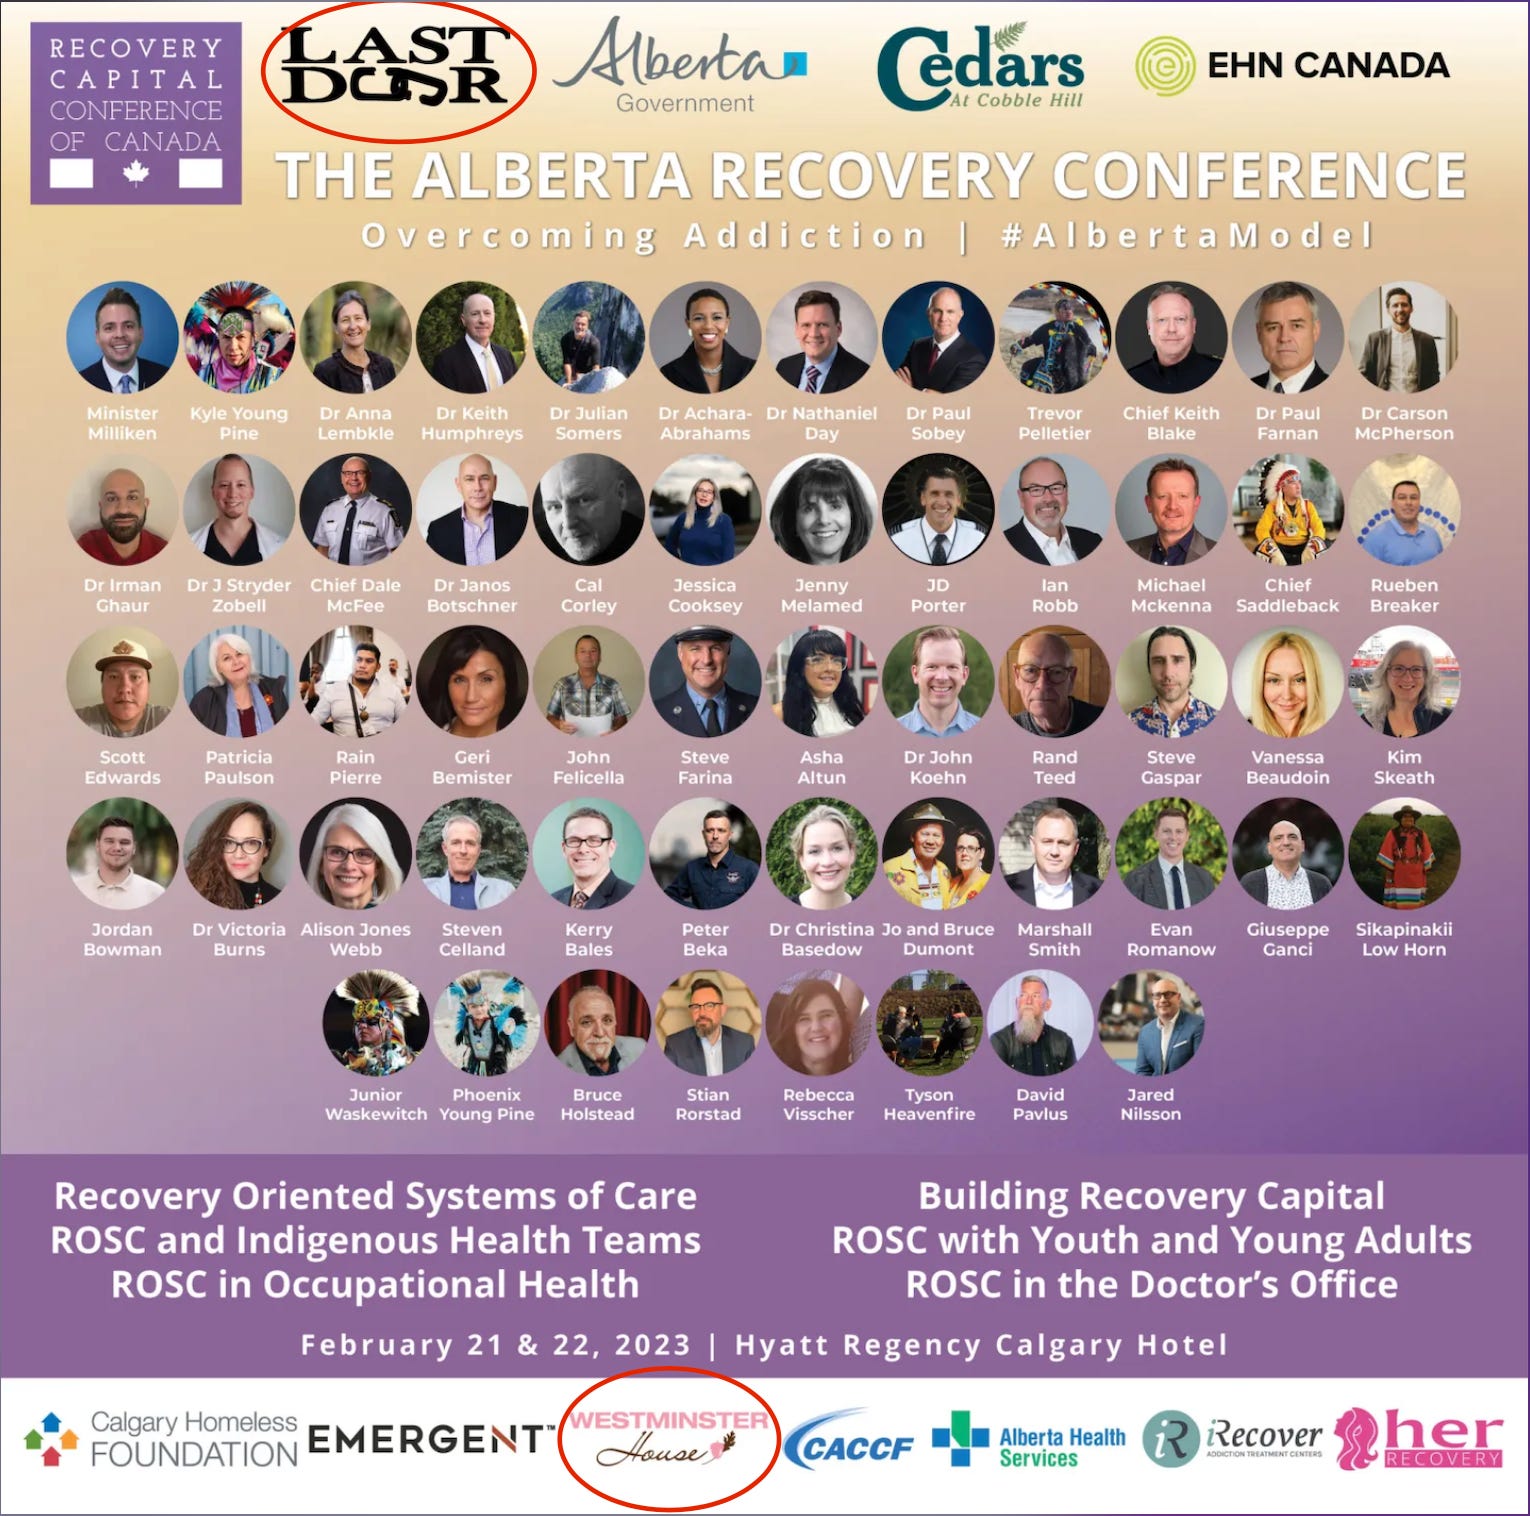 The Alberta Recovery Conference: Overcoming Addiction. Speakers and sponsors shown on the poster. Sponsors include Last Door and Westminster House.